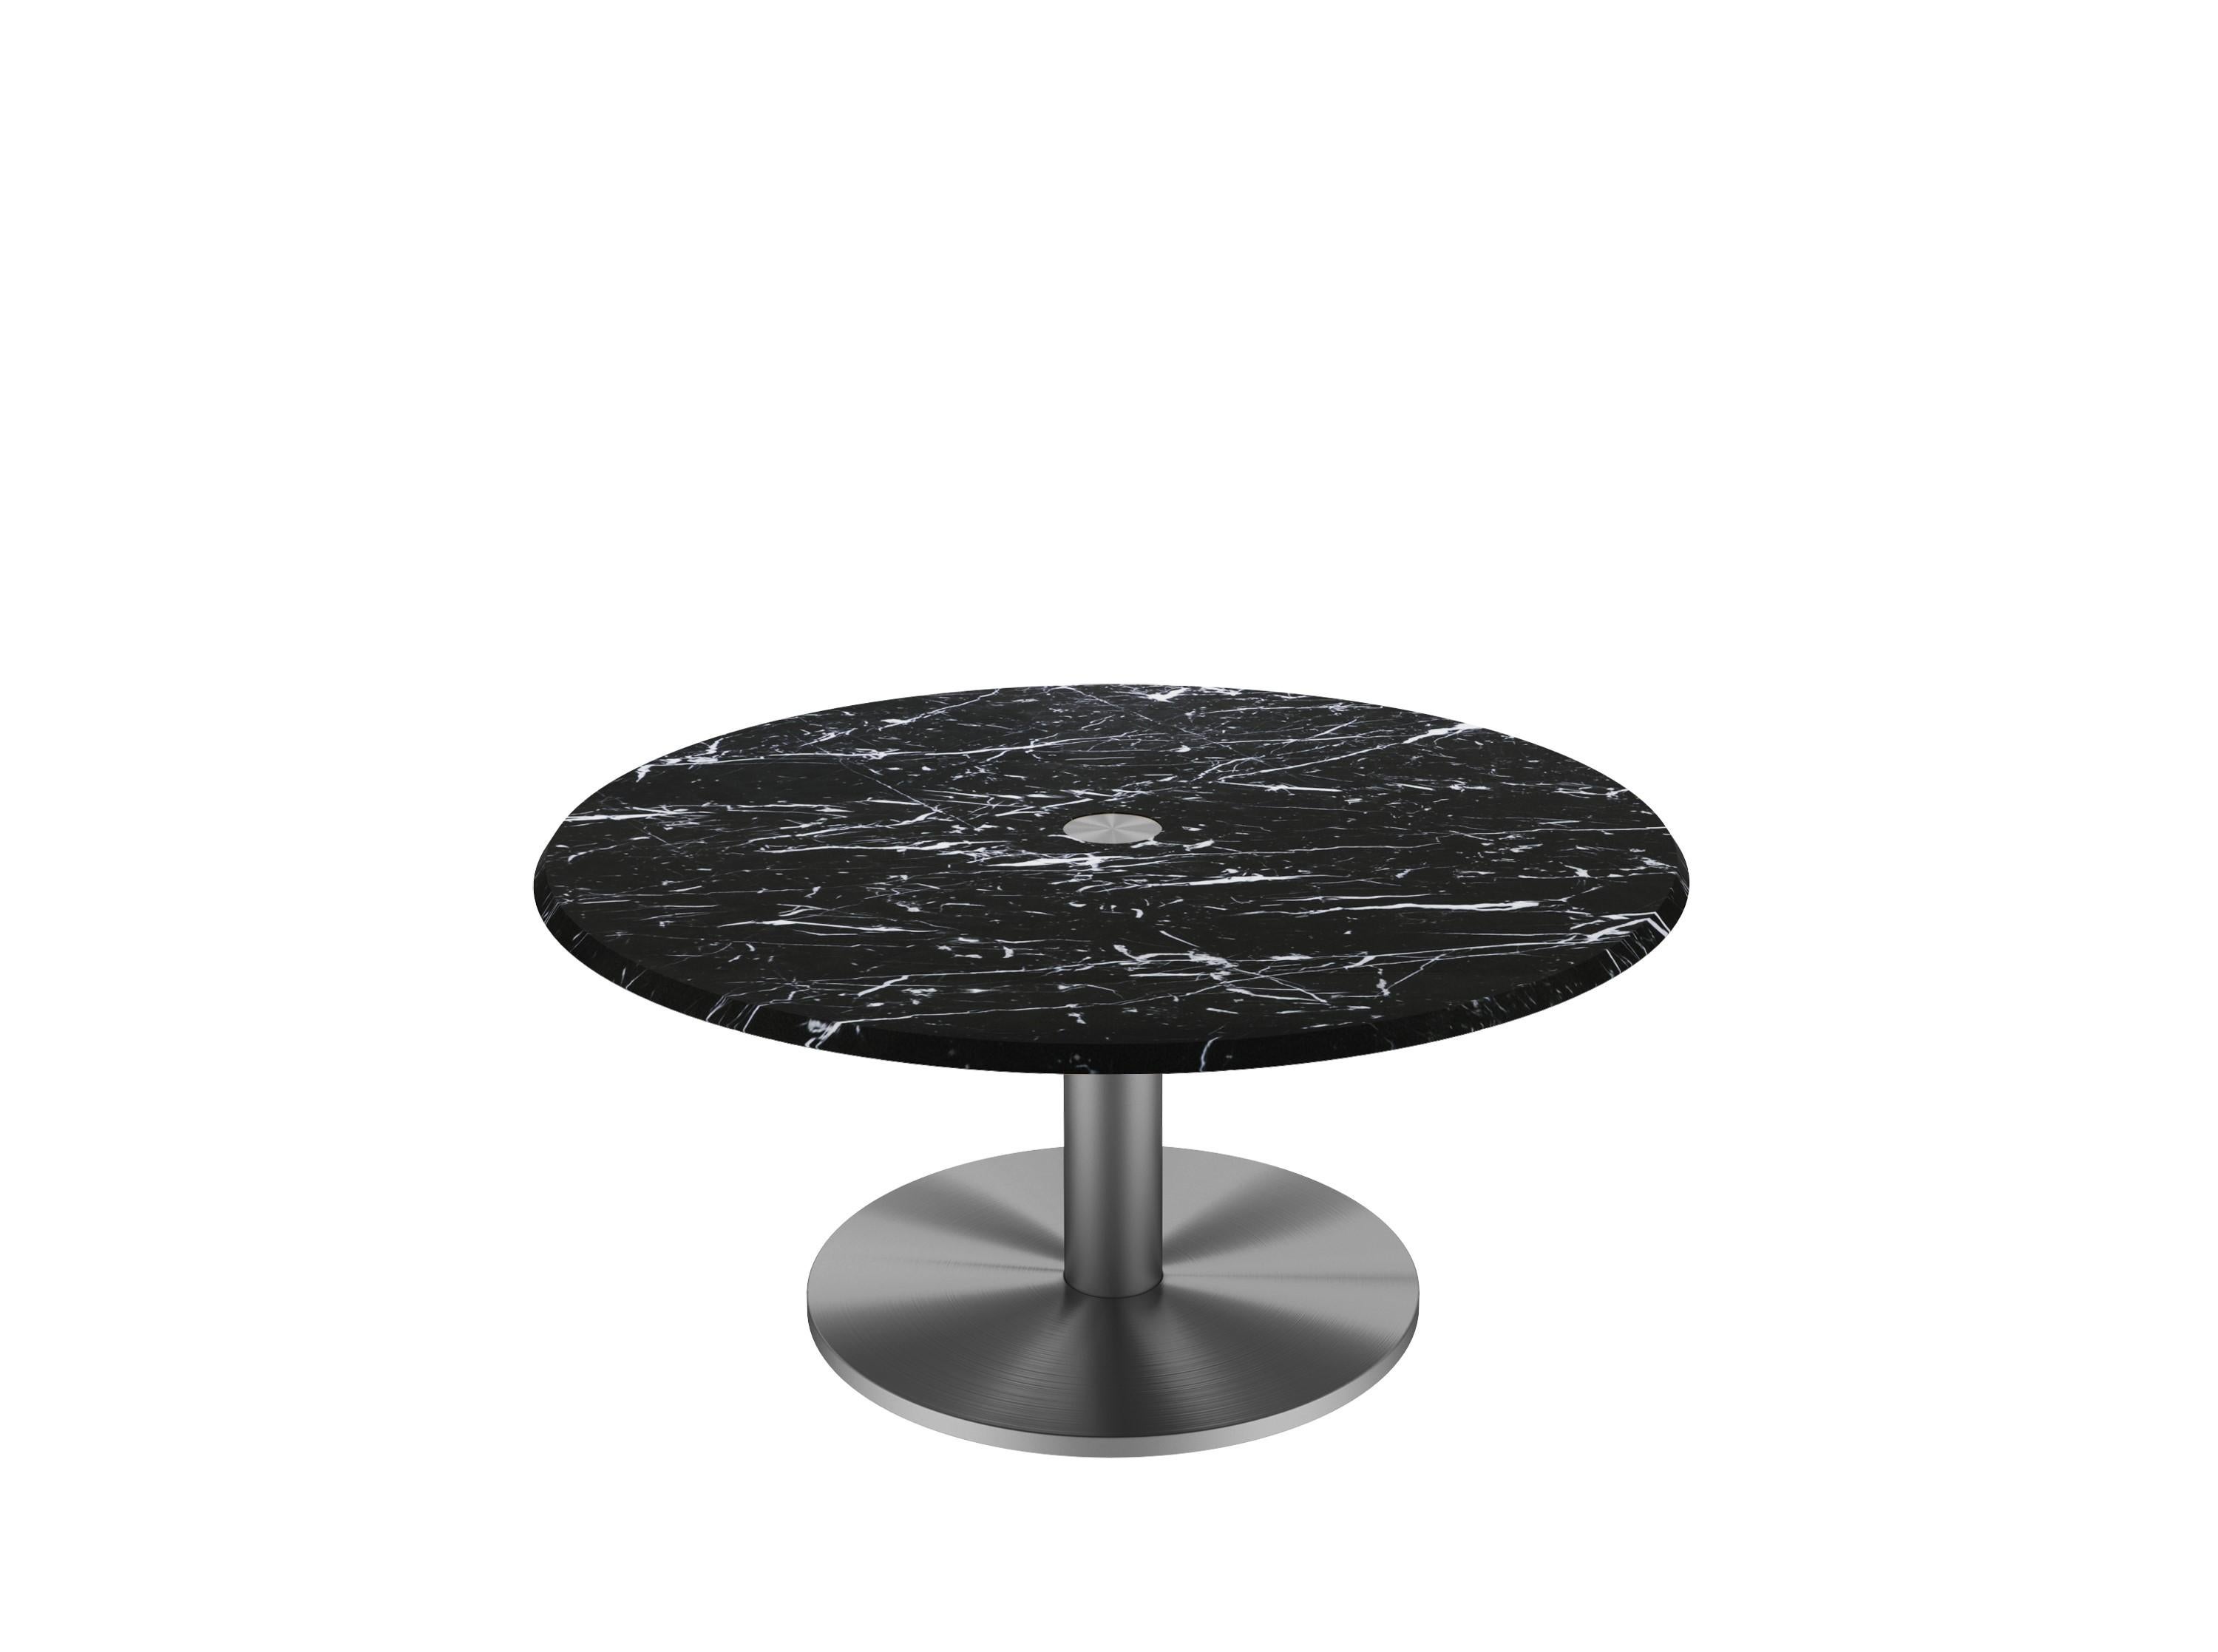 𝗣𝗿𝗼𝗱𝘂𝗰𝘁 𝗗𝗲𝘁𝗮𝗶𝗹𝘀:
Beautiful round coffee table with a single cylindric column frame going through the marble tabletop to expose the nicely done metal work on the surface; furthermore, the bottom can have a matching marble piece to